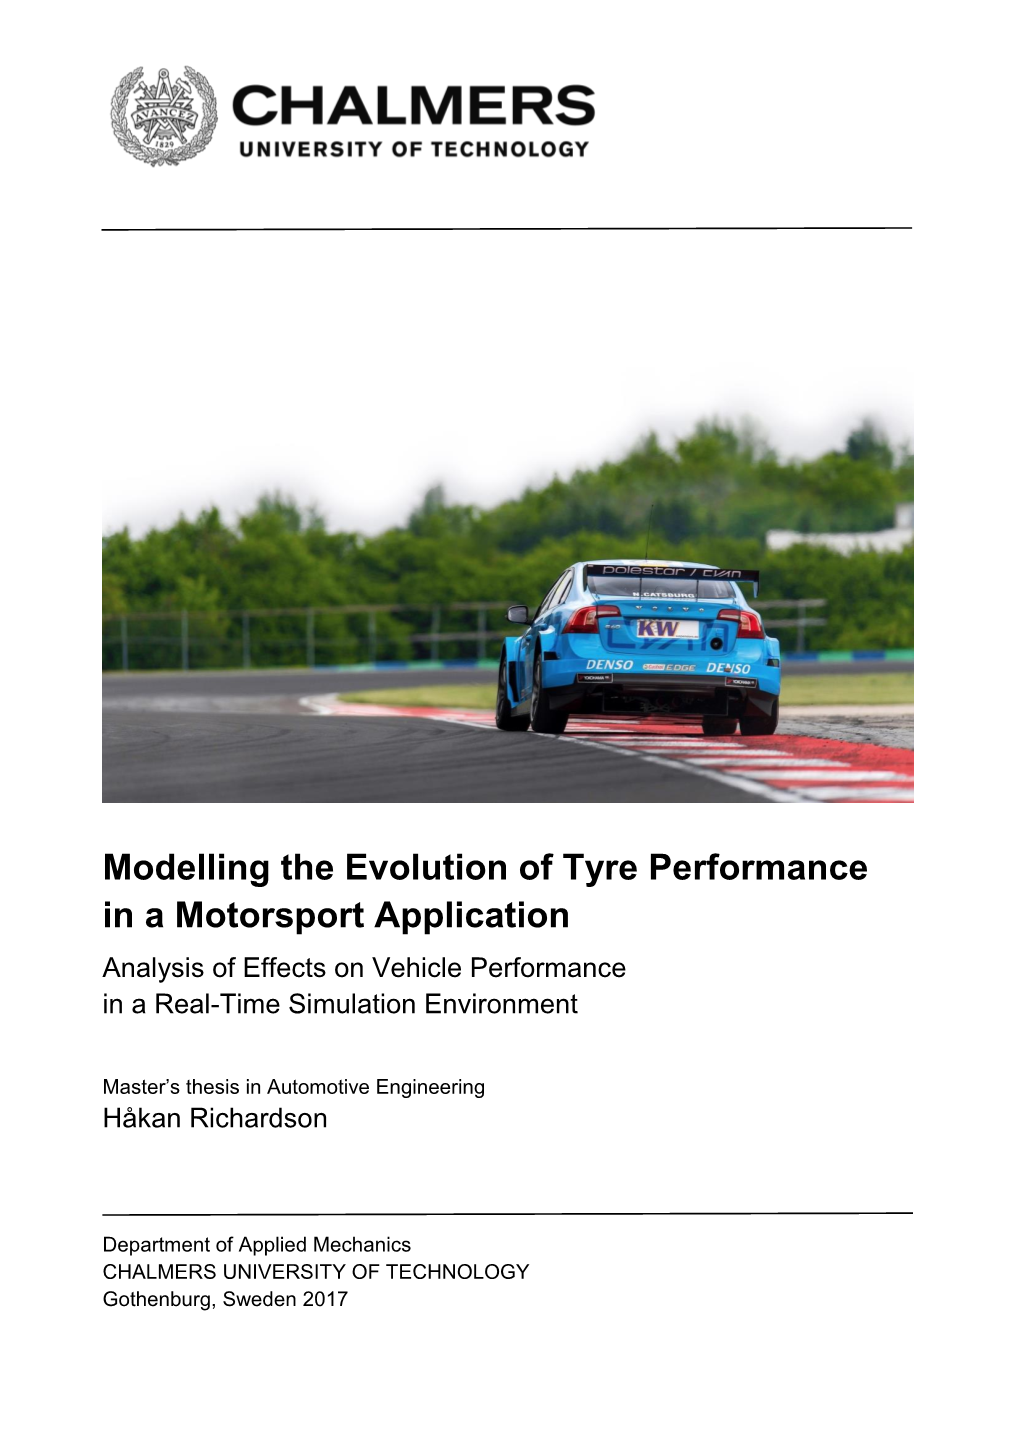 Modelling the Evolution of Tyre Performance in a Motorsport Application Analysis of Effects on Vehicle Performance in a Real-Time Simulation Environment